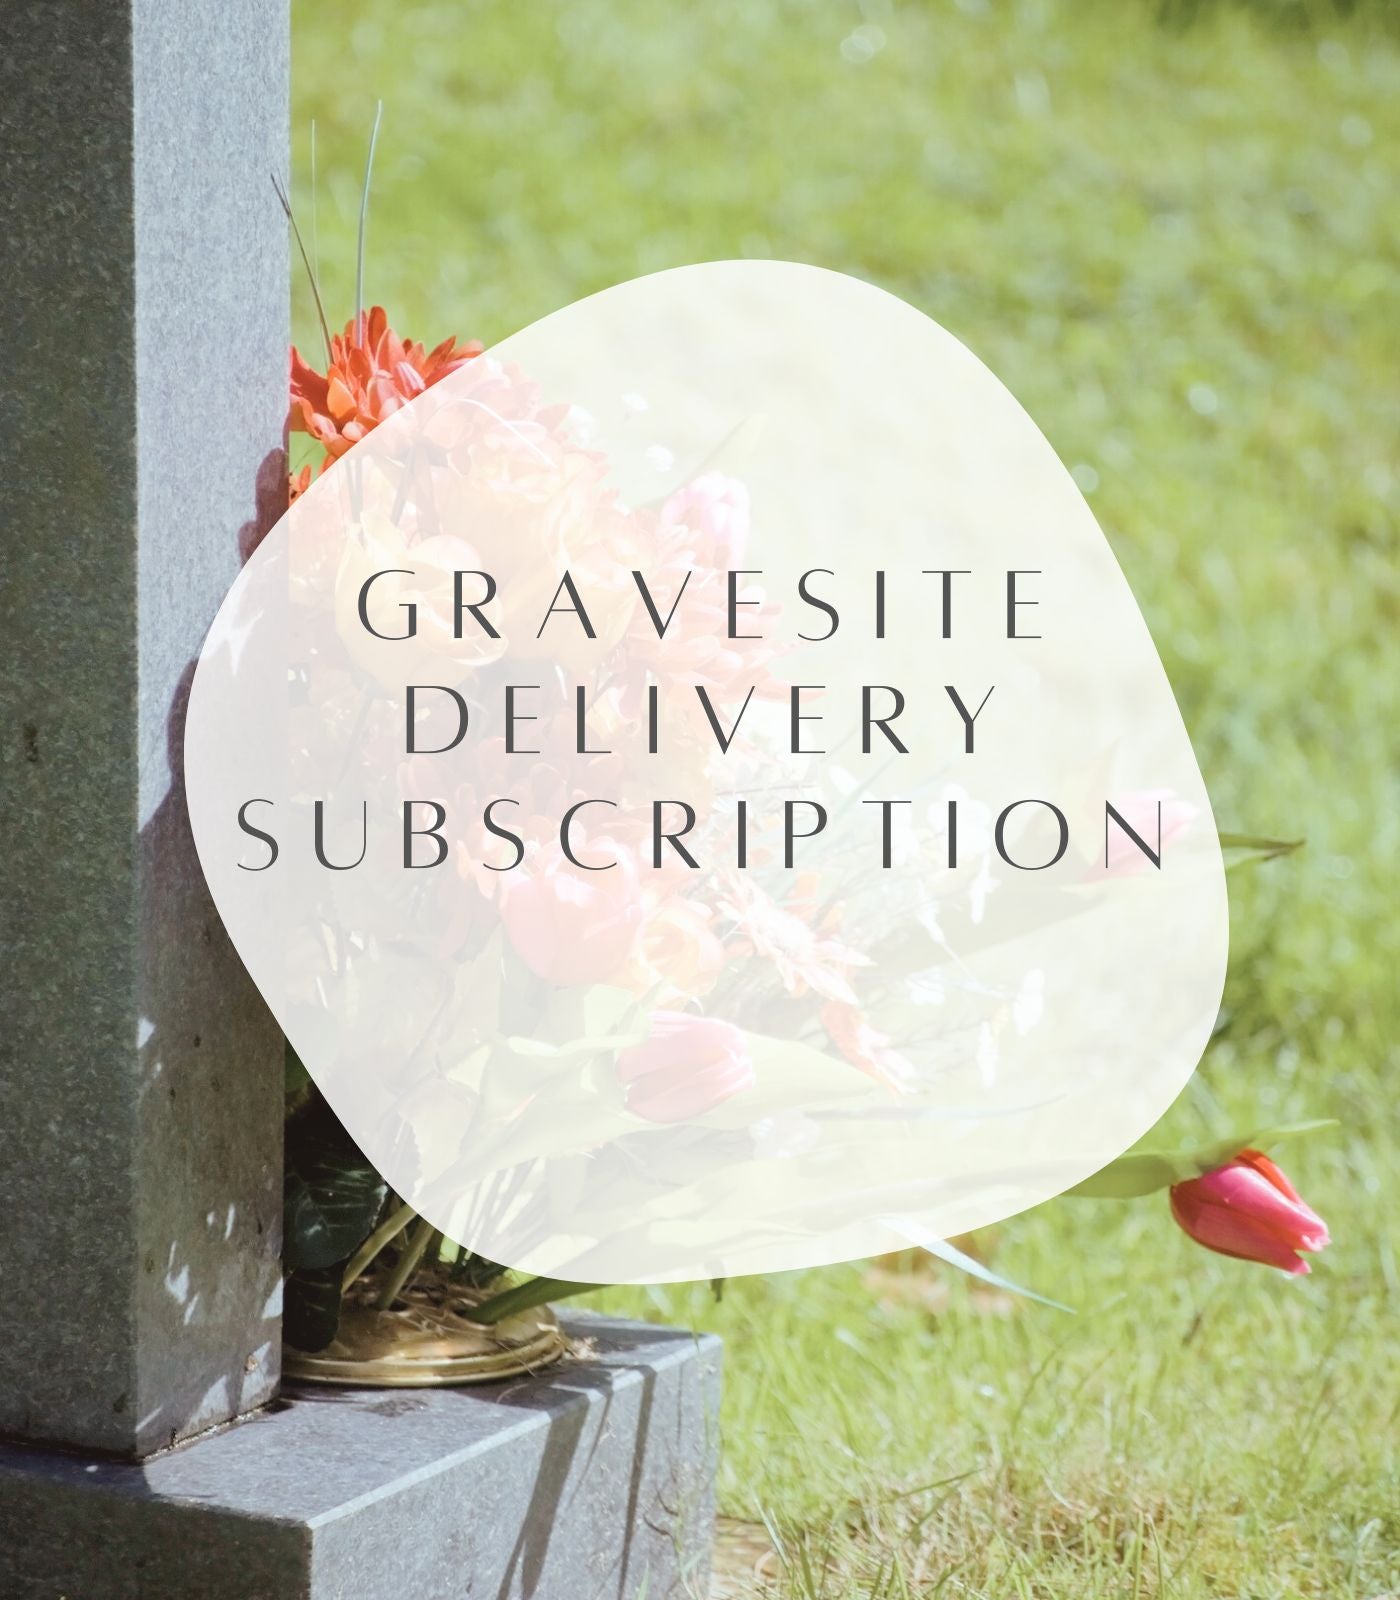 Gravesite Delivery Subscription